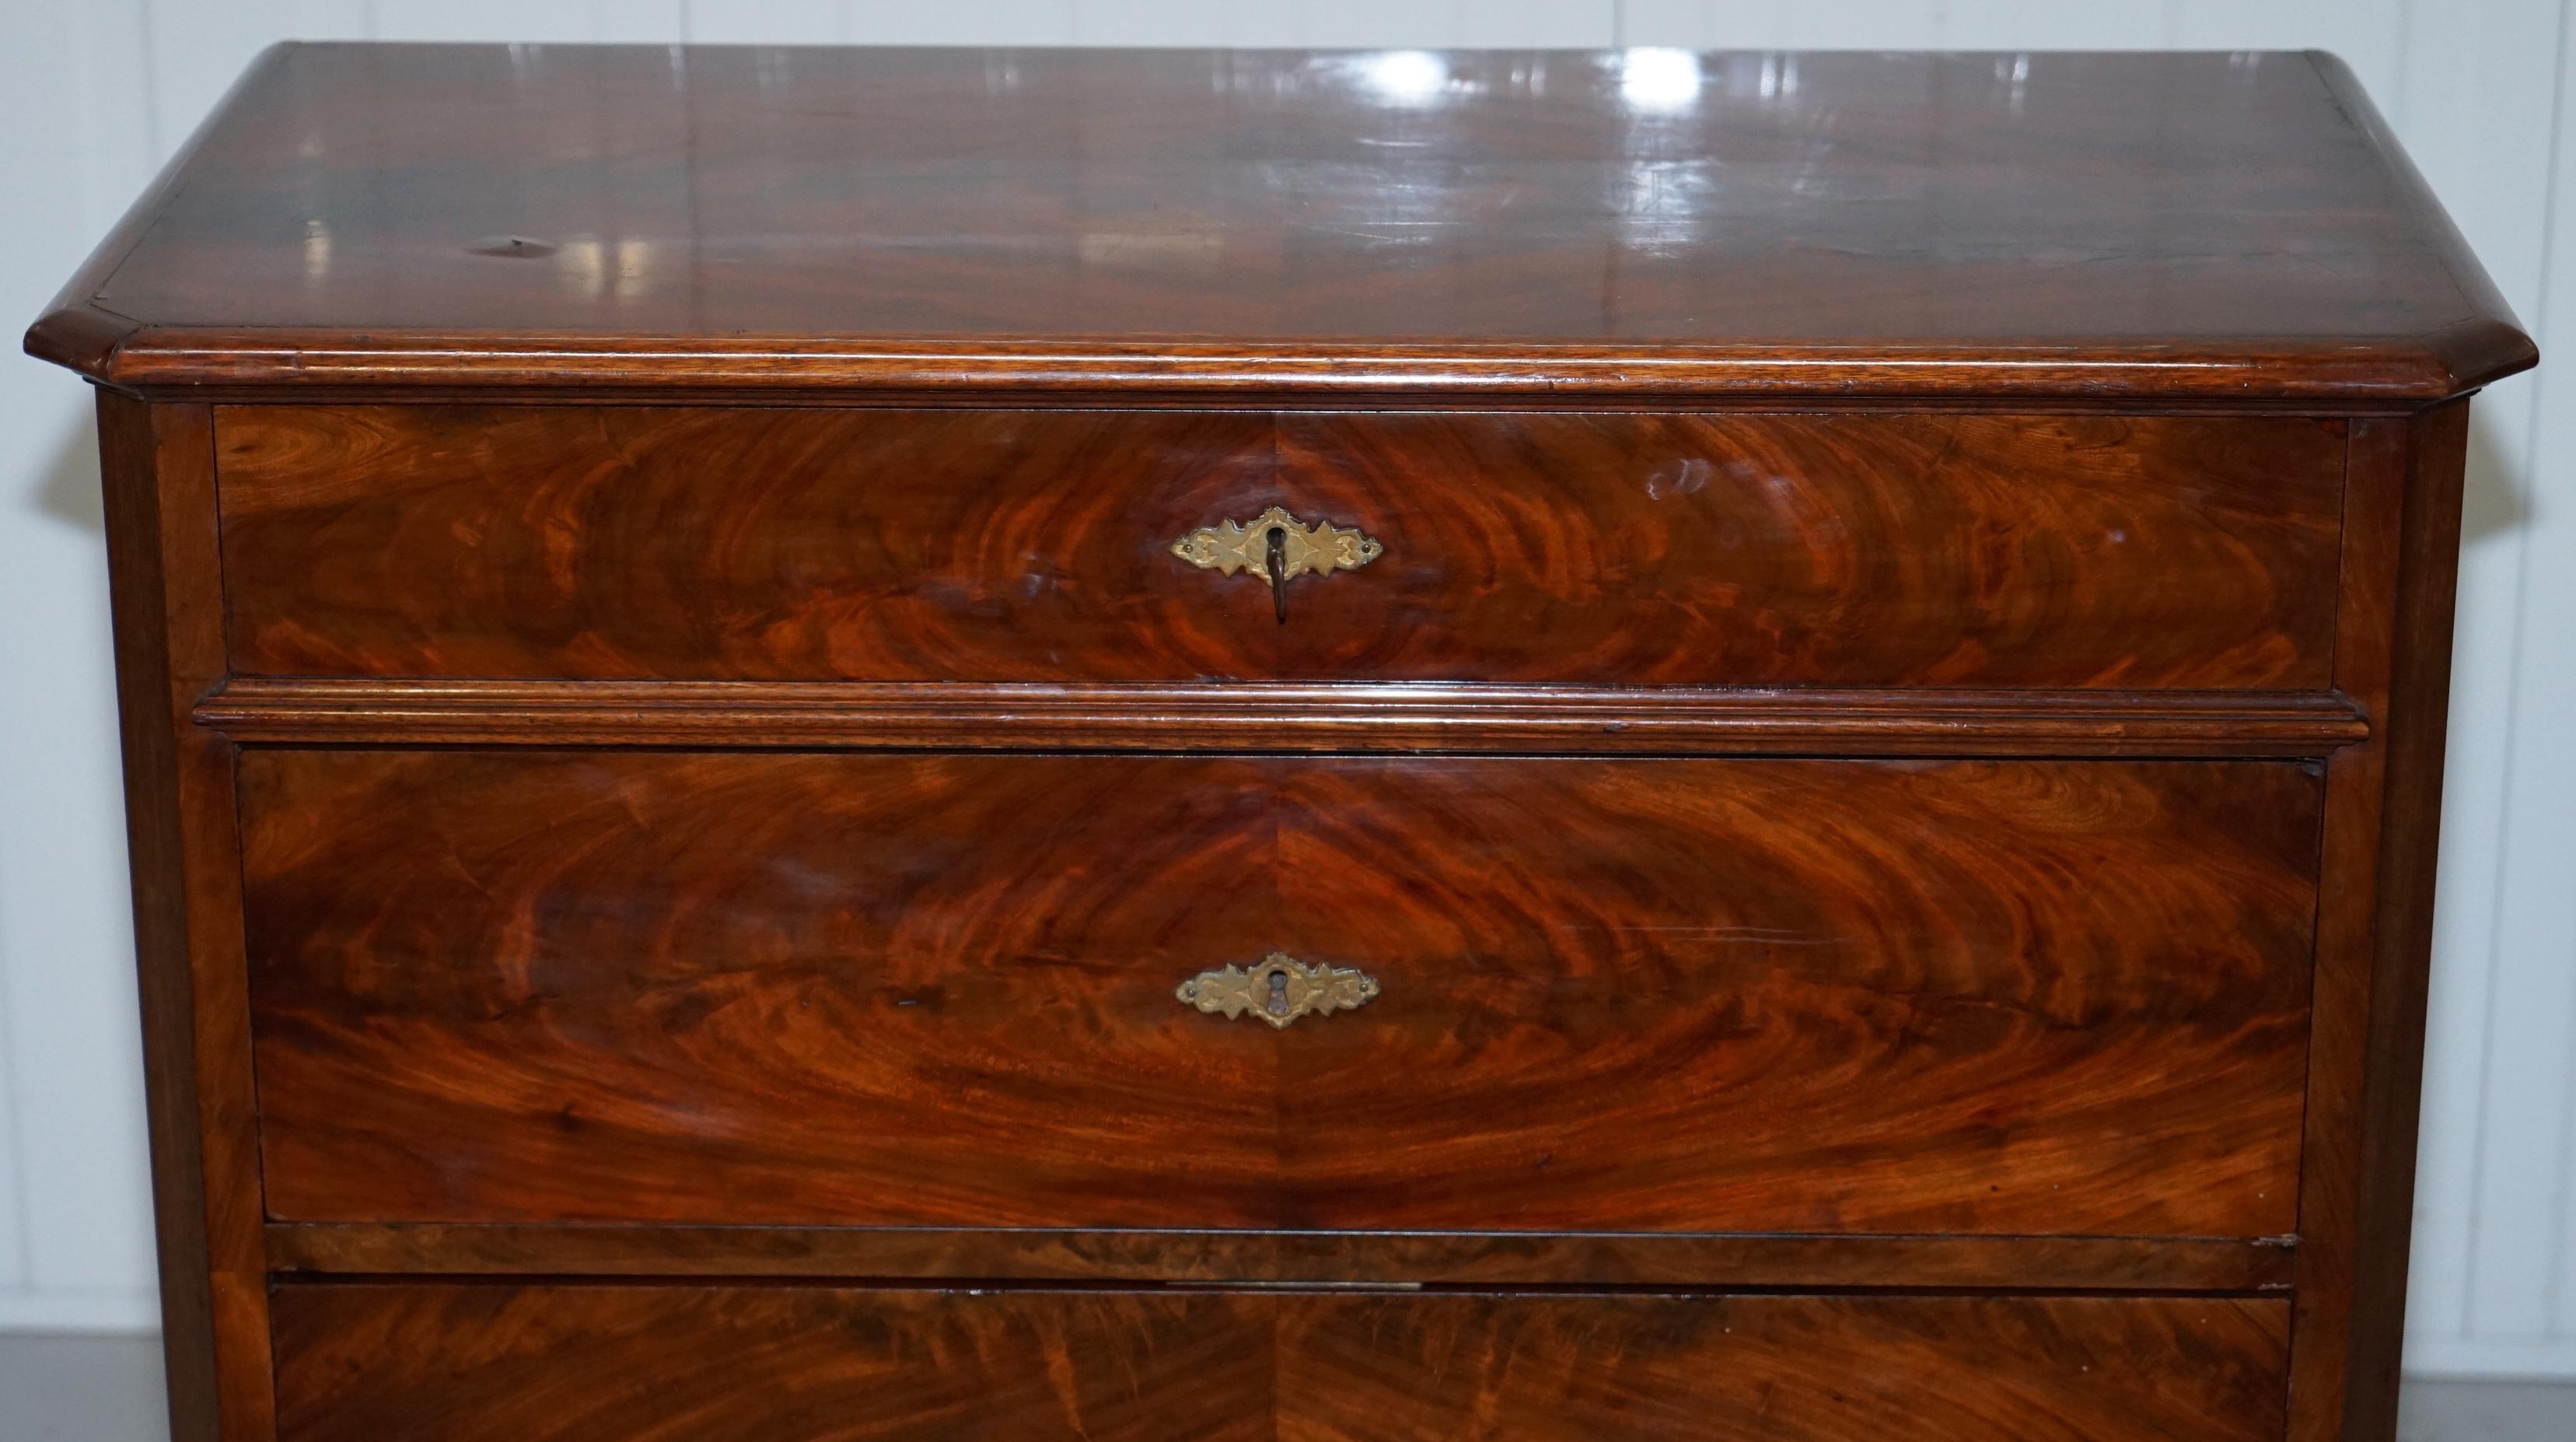 Stunning Biedermeier Flamed Mahogany Small Chest of Drawers Rare Find circa 1820 4